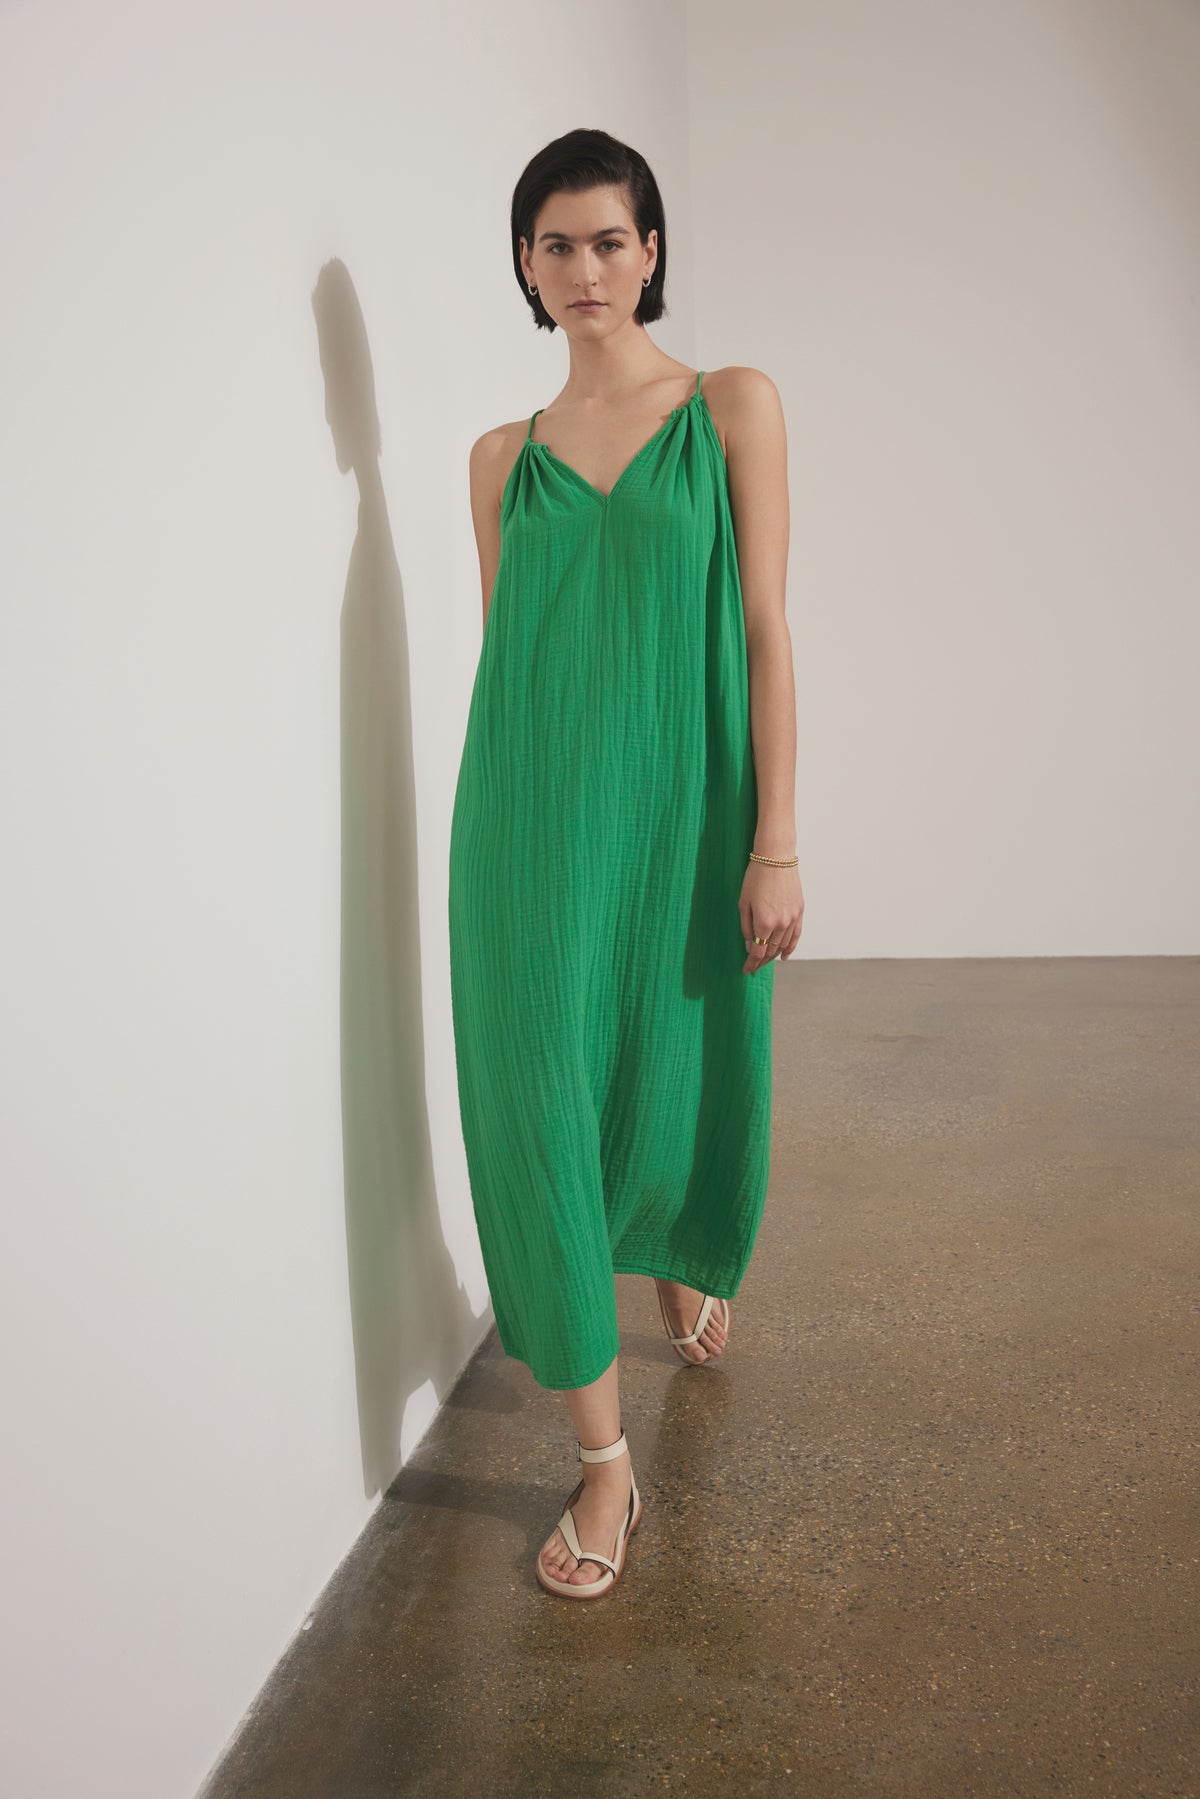 A woman wearing a flowing green Carrillo dress by Velvet by Jenny Graham and sandals stands against a white wall, casting a long shadow.-36863272026305